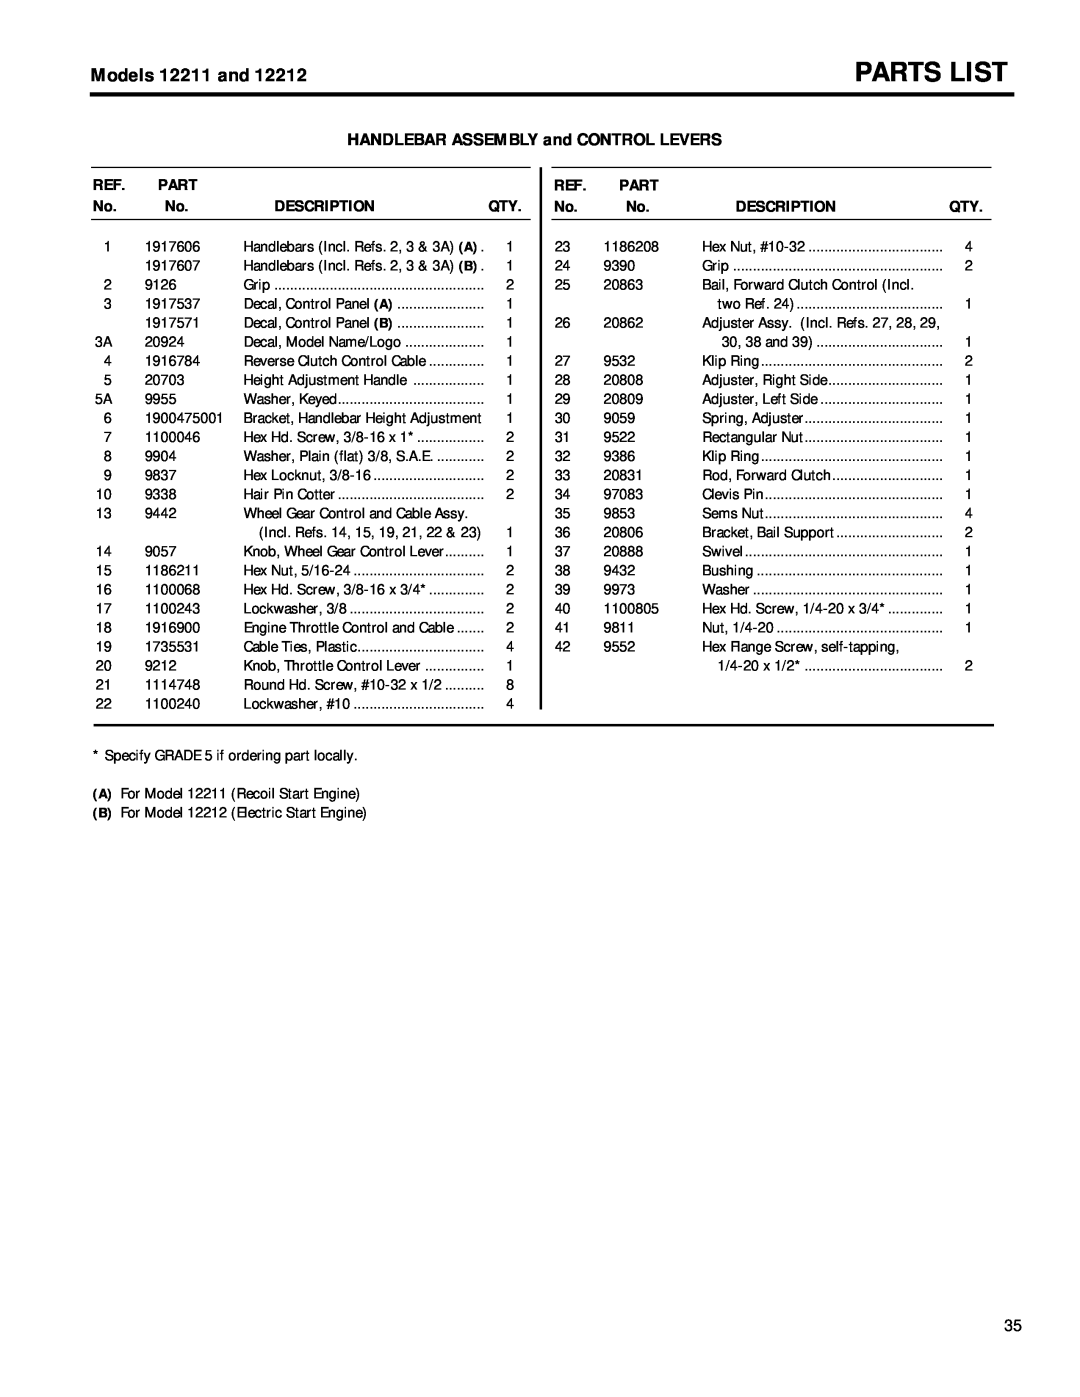 Troy-Bilt 12212 owner manual Parts List, Models 12211 and, HANDLEBAR ASSEMBLY and CONTROL LEVERS, Description 